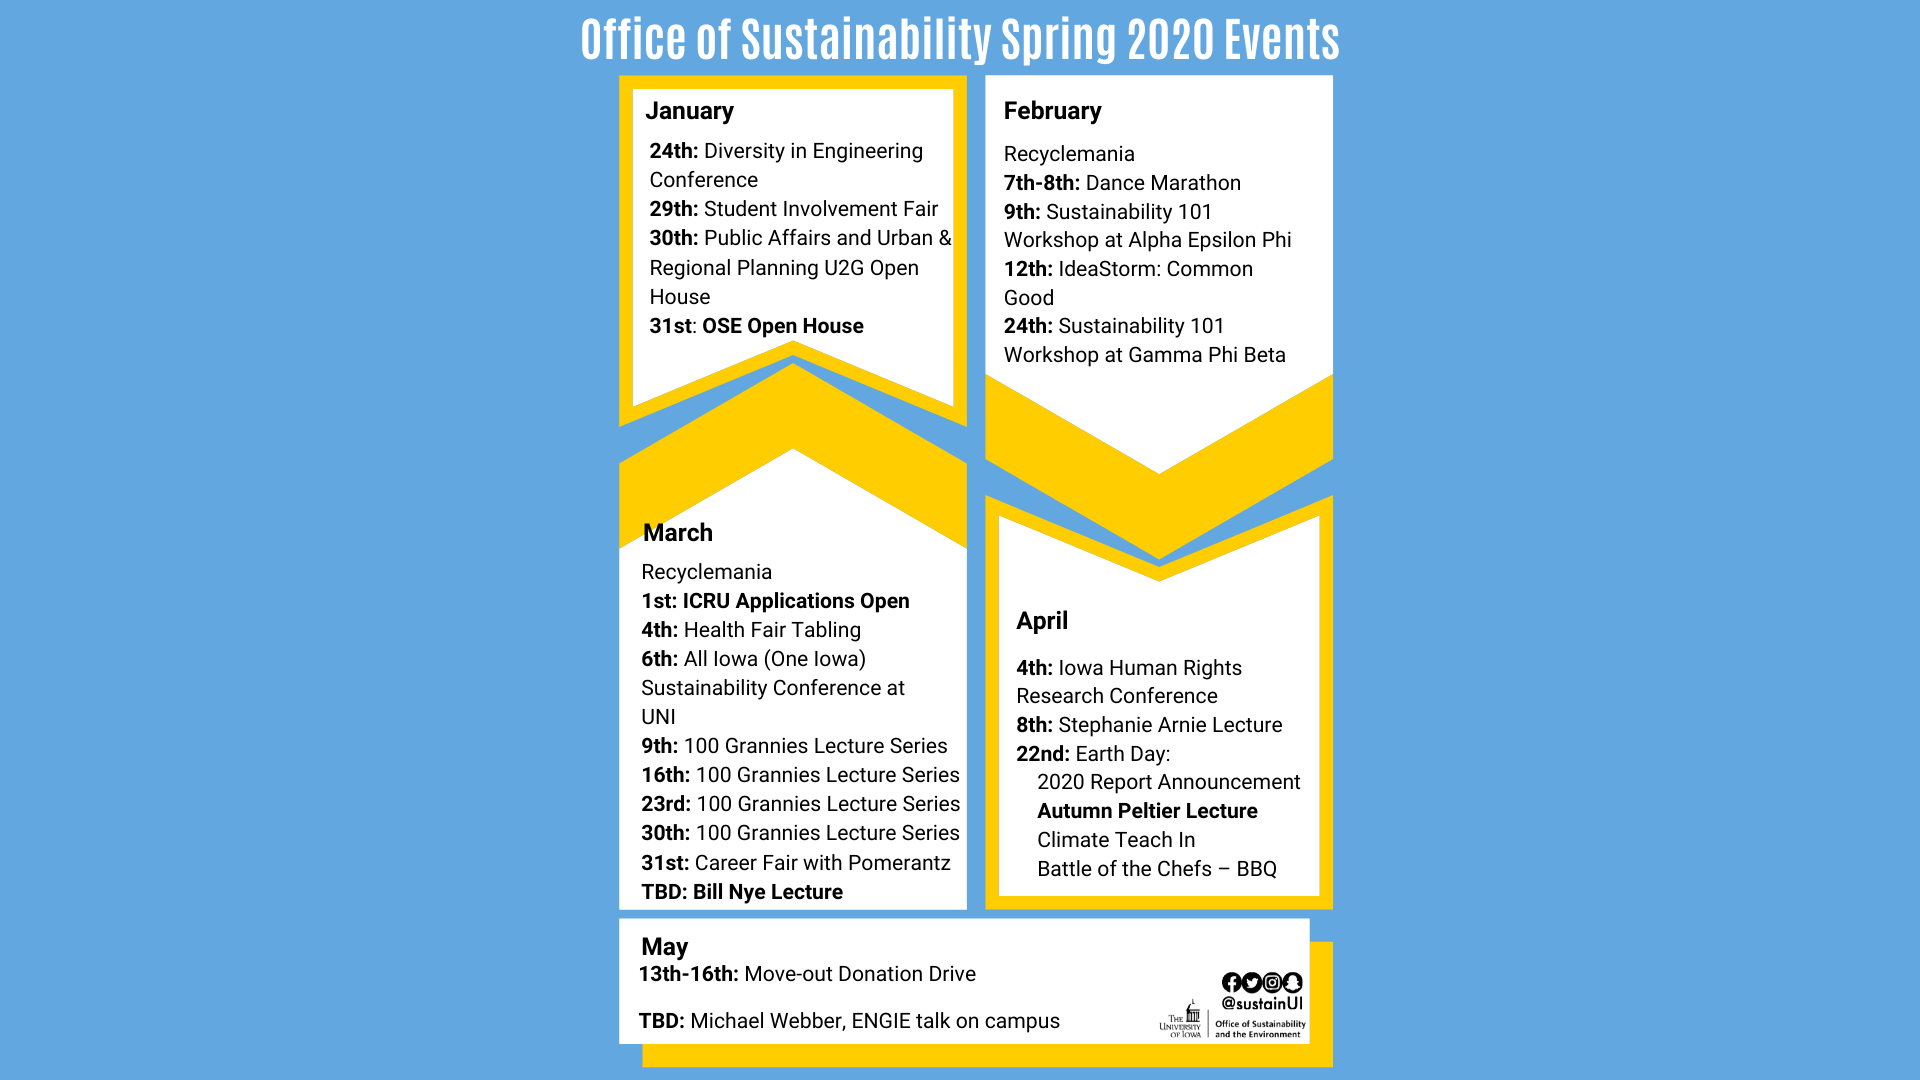 Office of Sustainability and the Environment Spring 2020 events